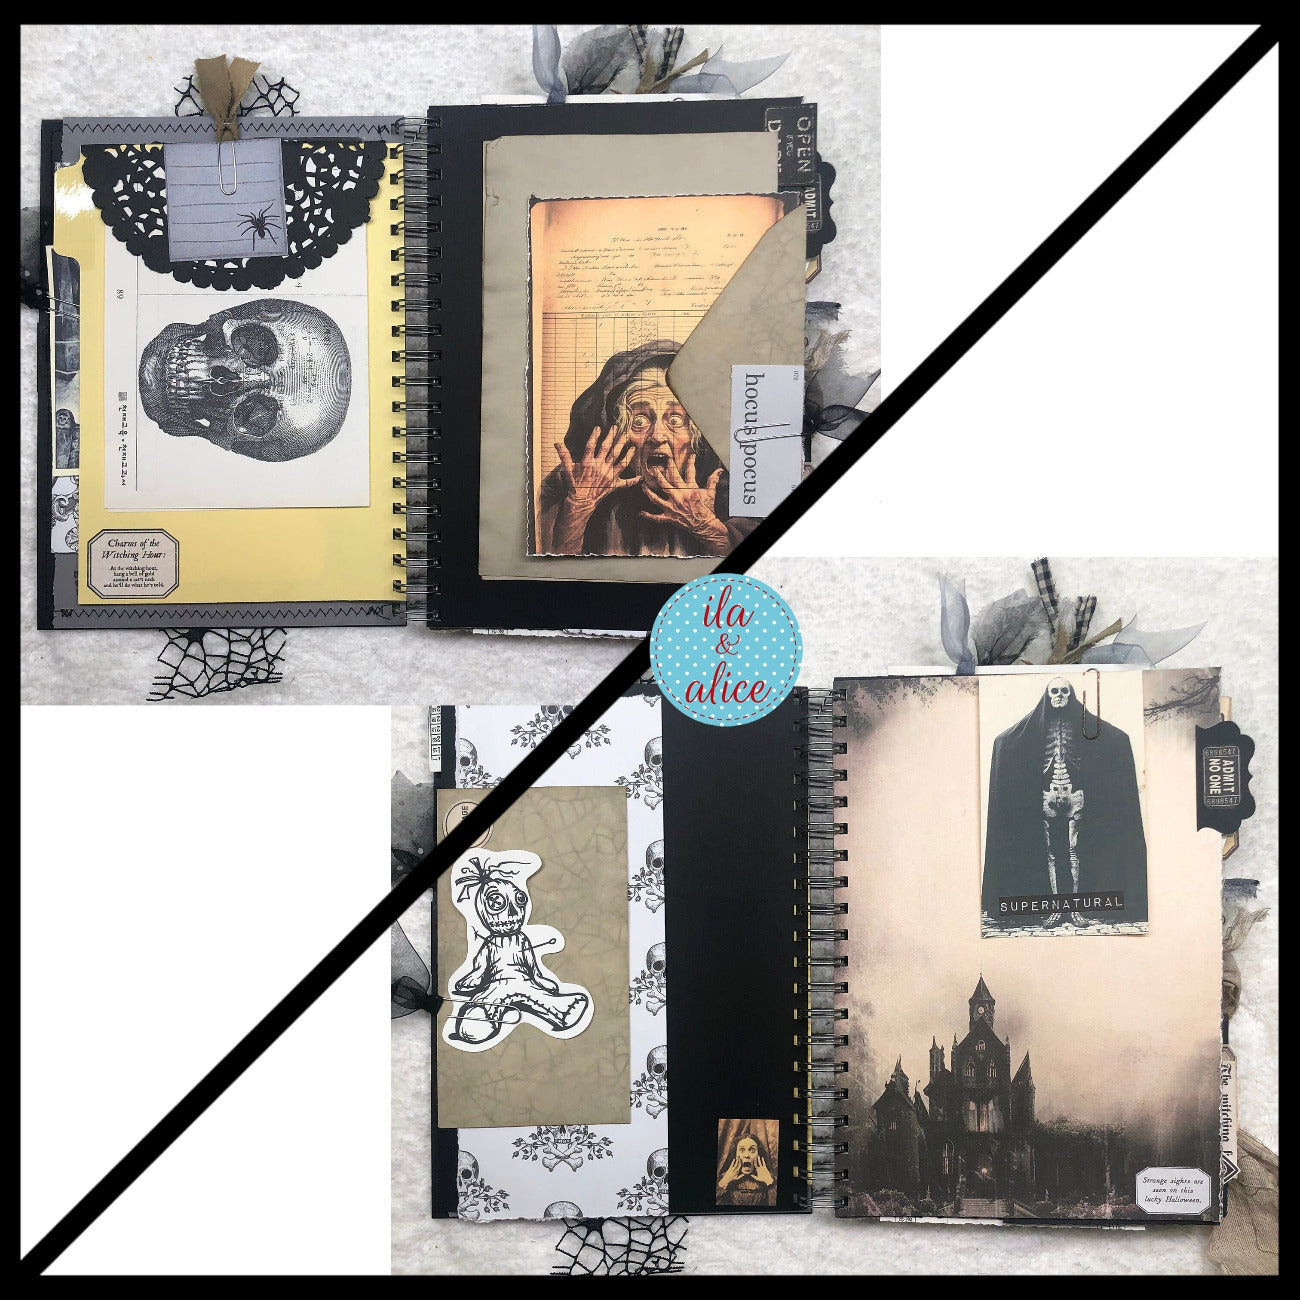 Macabre Witch Halloween Junk Journal with Ghosts & Ghouls Journal ila & alice 